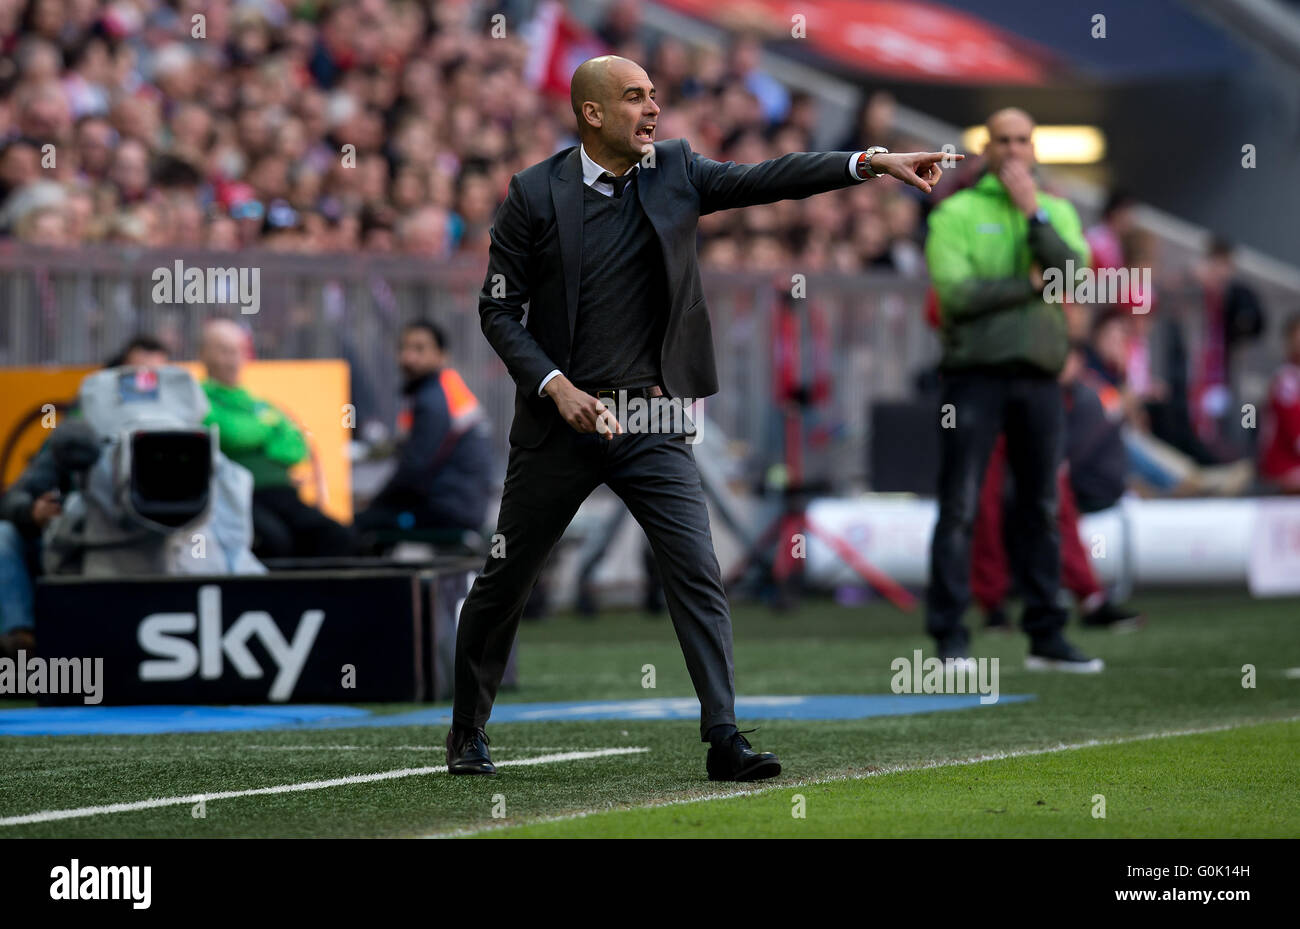 Munich, Germany. 30th Apr, 2016. Munich's head coach Josep Guardiola (L) and his Gladbach counterpart Andre Schubert watch from the sidelines during the German Bundesliga soccer match between Bayern Munich and Borussia Moenchengladbach at the Allianz Arena in Munich, Germany, 30 April 2016. Photo: SVEN HOPPE/dpa/Alamy Live News Stock Photo